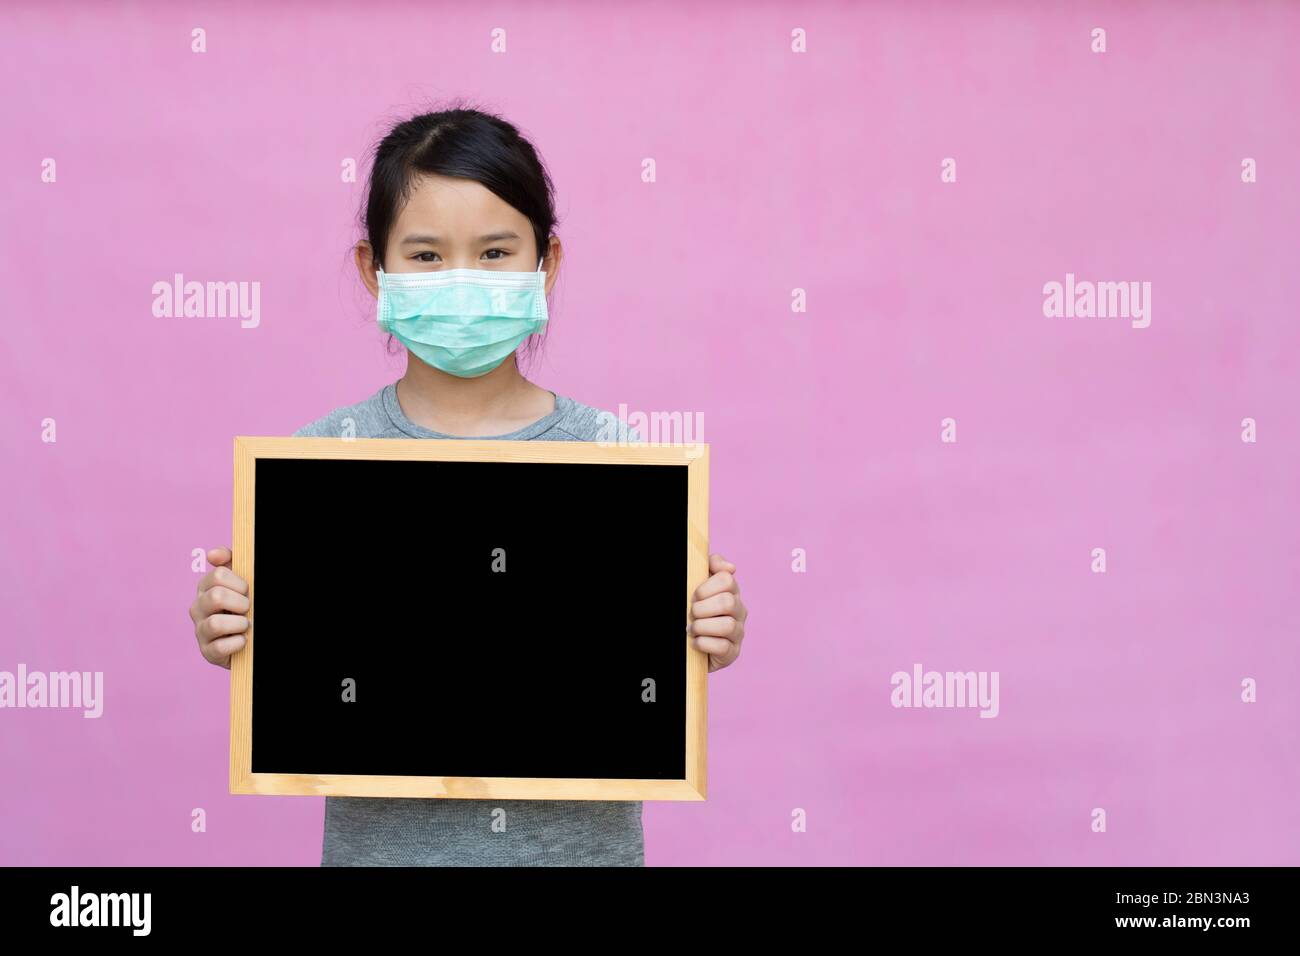 Little asian girl in a protective medical mask holding blackboard isolated on pink background. Protect from Coronavirus or Covid-19 epidemic. Stock Photo